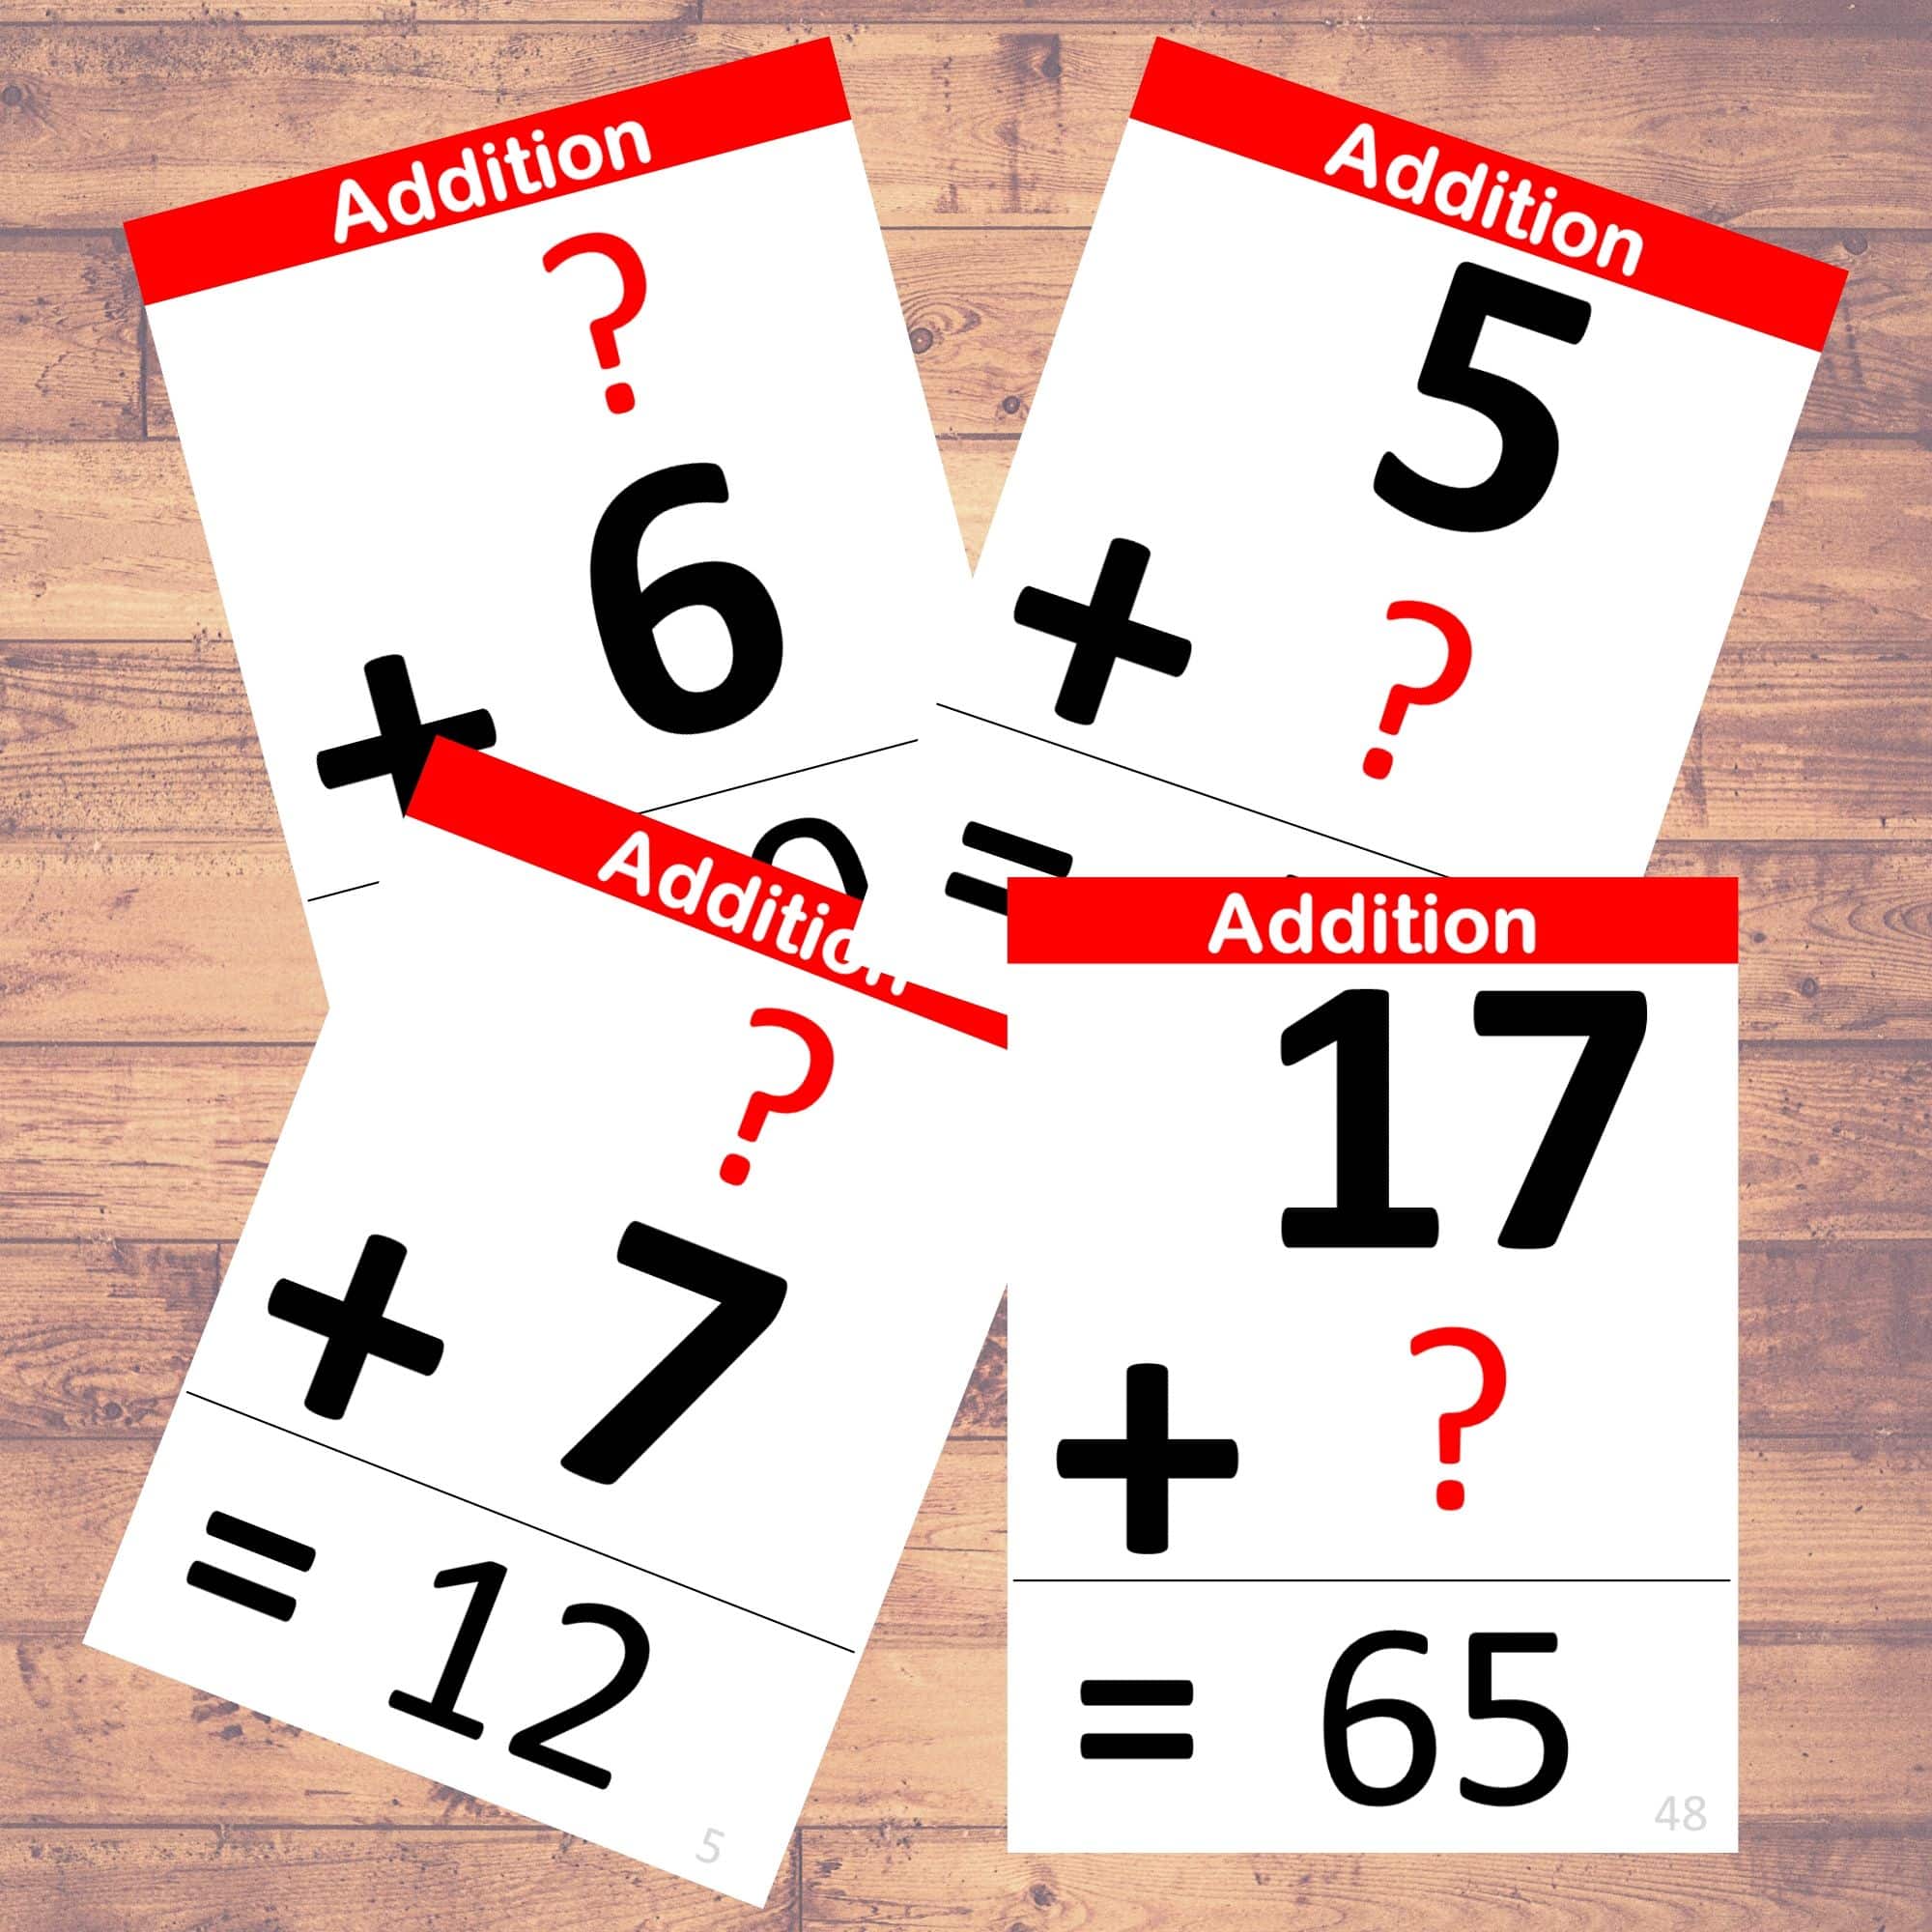 addition-problems-flashcards-math-learning-40-cards-lifelolo